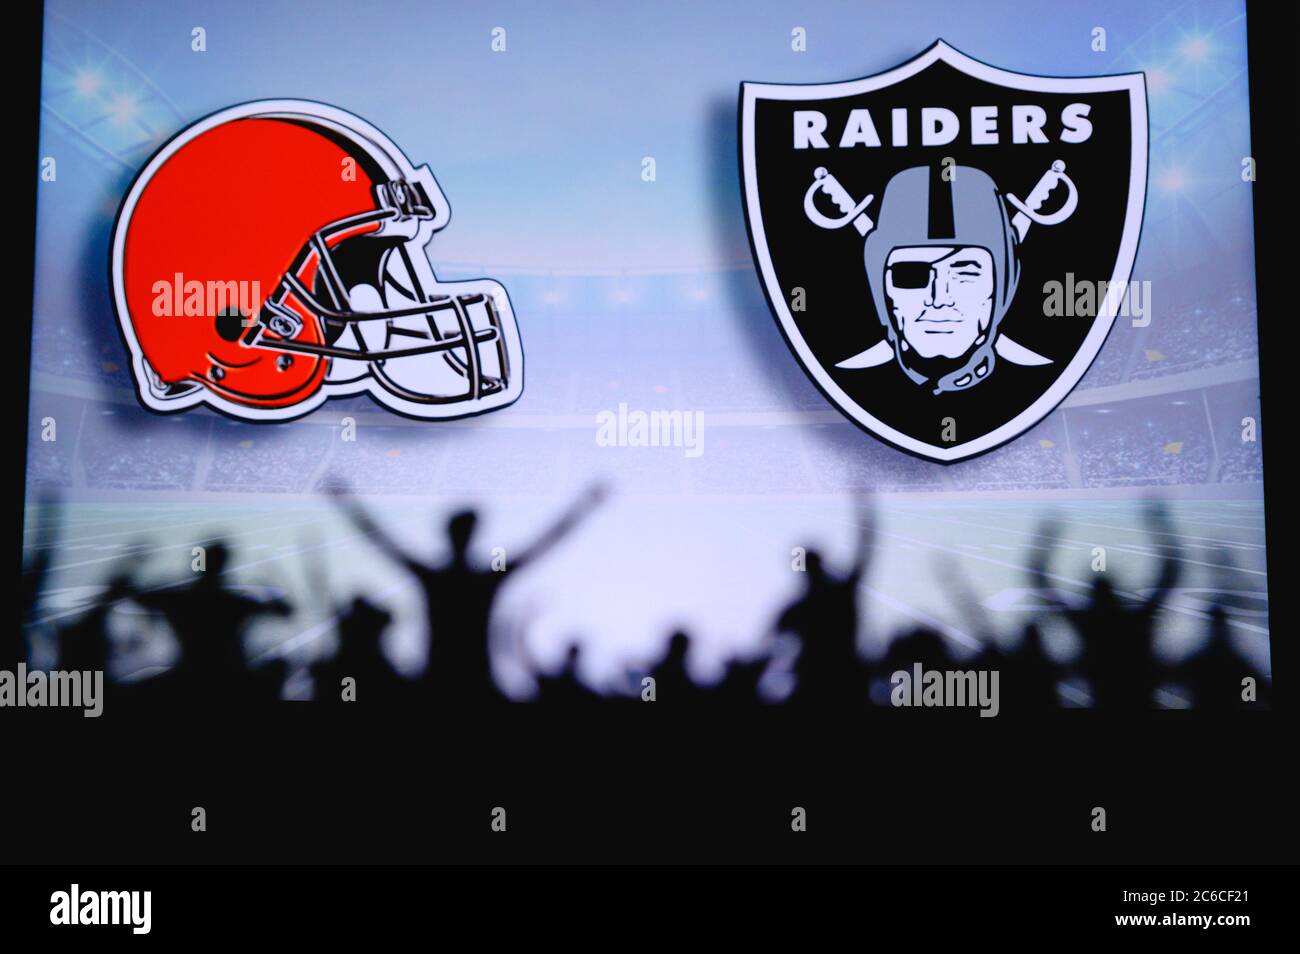 Raiders allegiant stadium victory hires stock photography and images